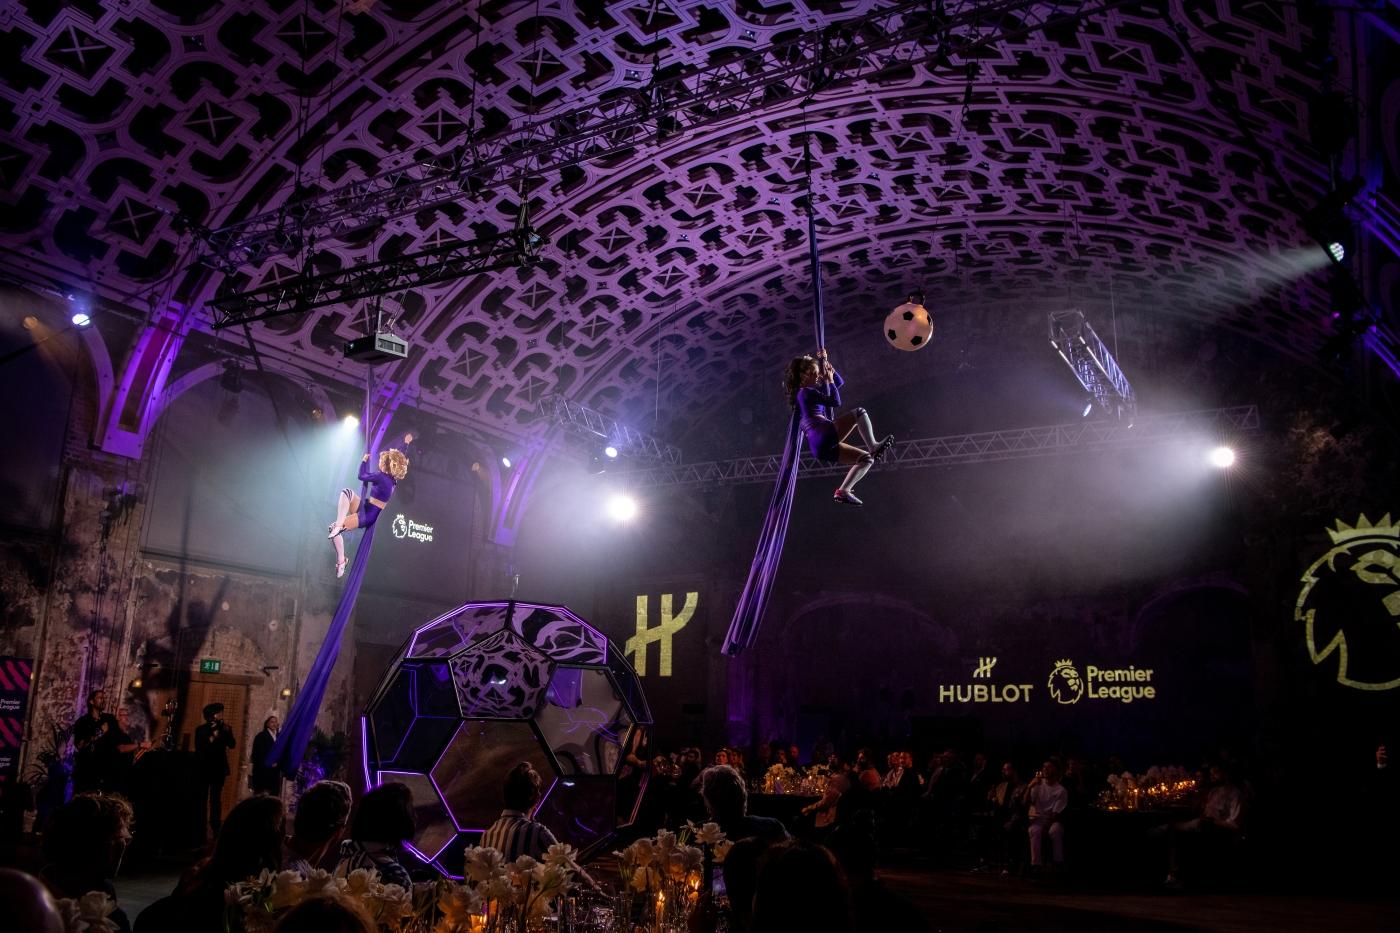 Acrobatic performance for the launch of the Classic Fusion Chronograph Premier League in London